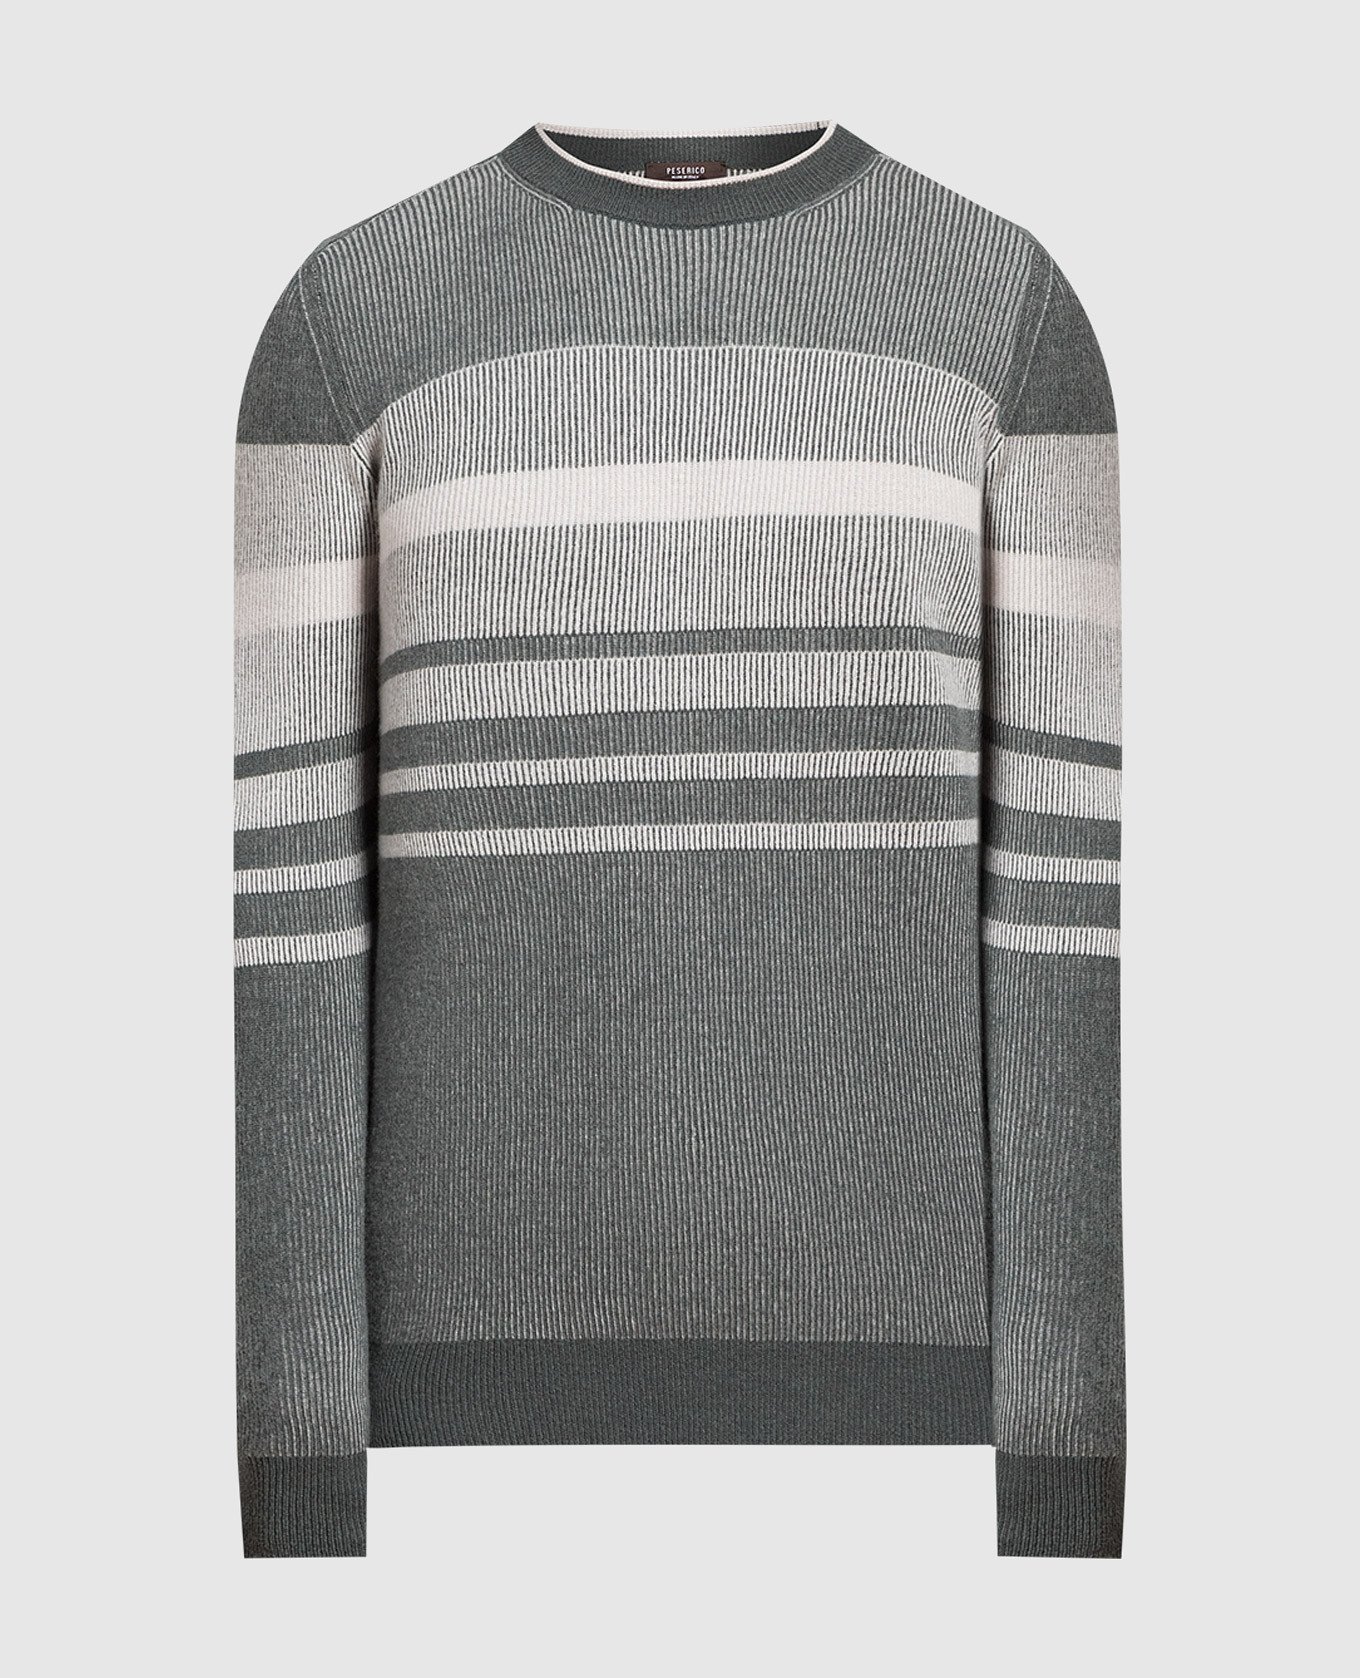 Grey striped wool and cashmere sweater